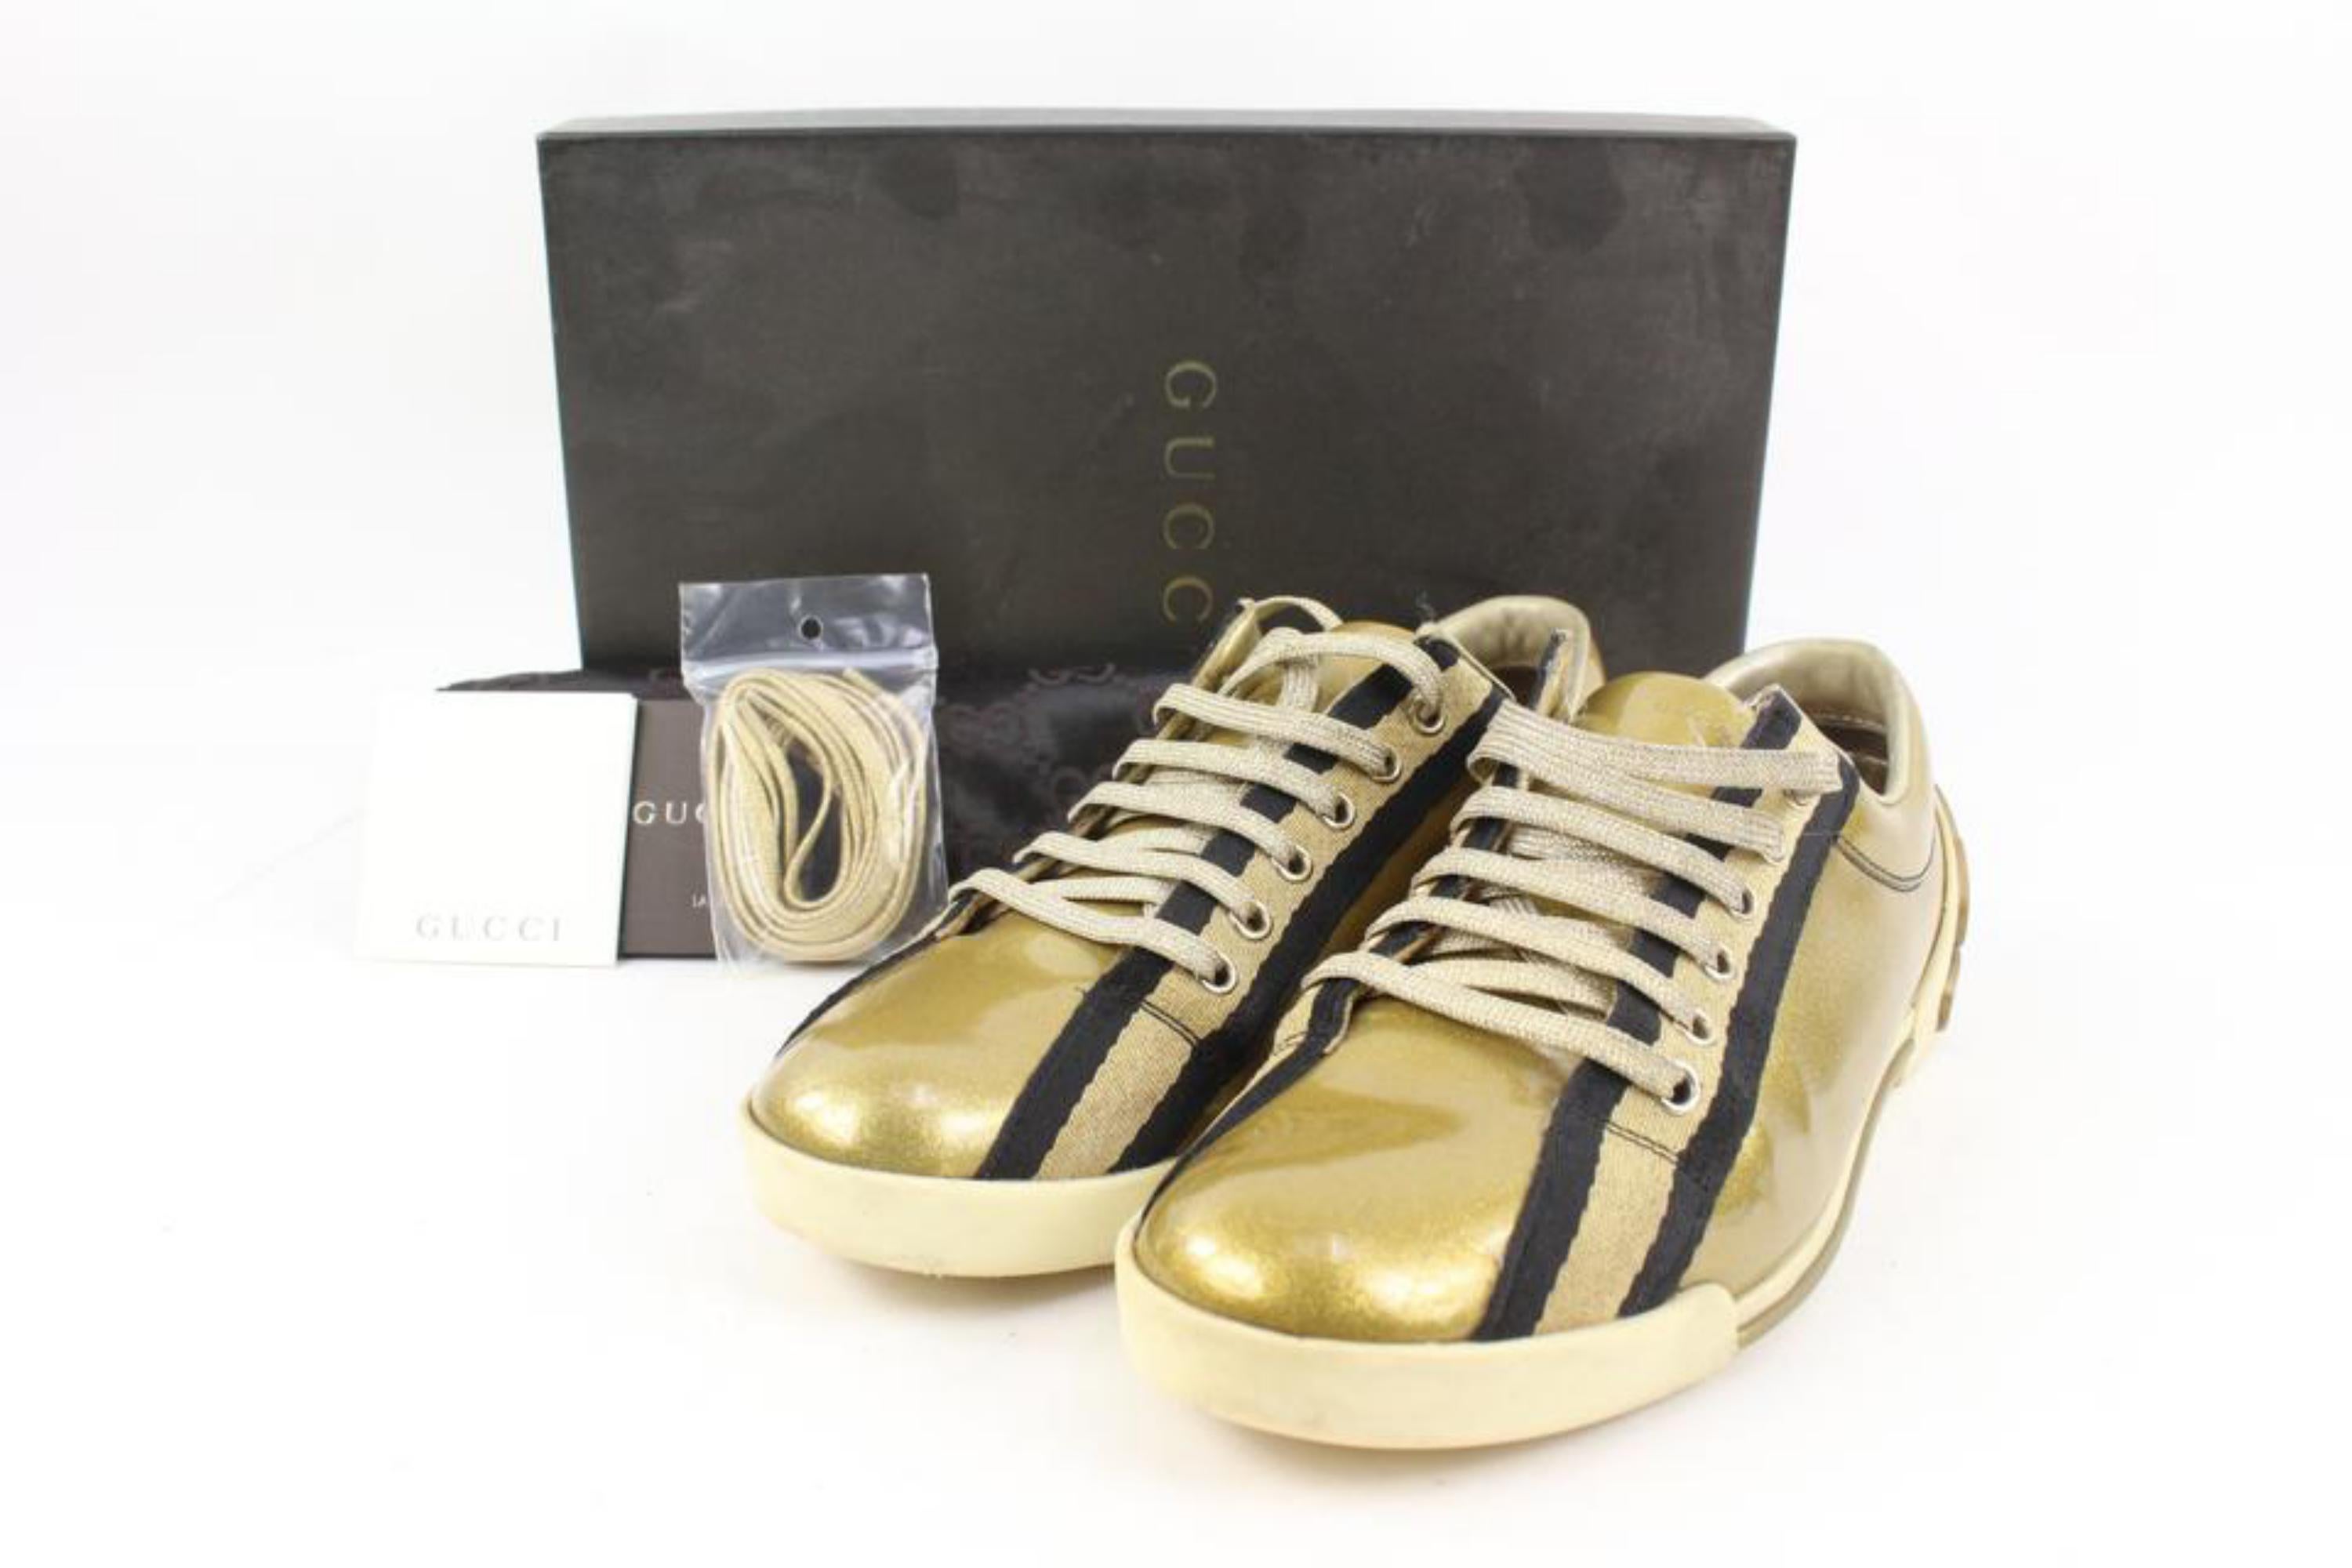 Gucci Women's 38.5 Metallic Gold Script Logo Web Low Sneaker 27g31s
Date Code/Serial Number: 168038
Made In: Italy
Measurements: Length:  10.8